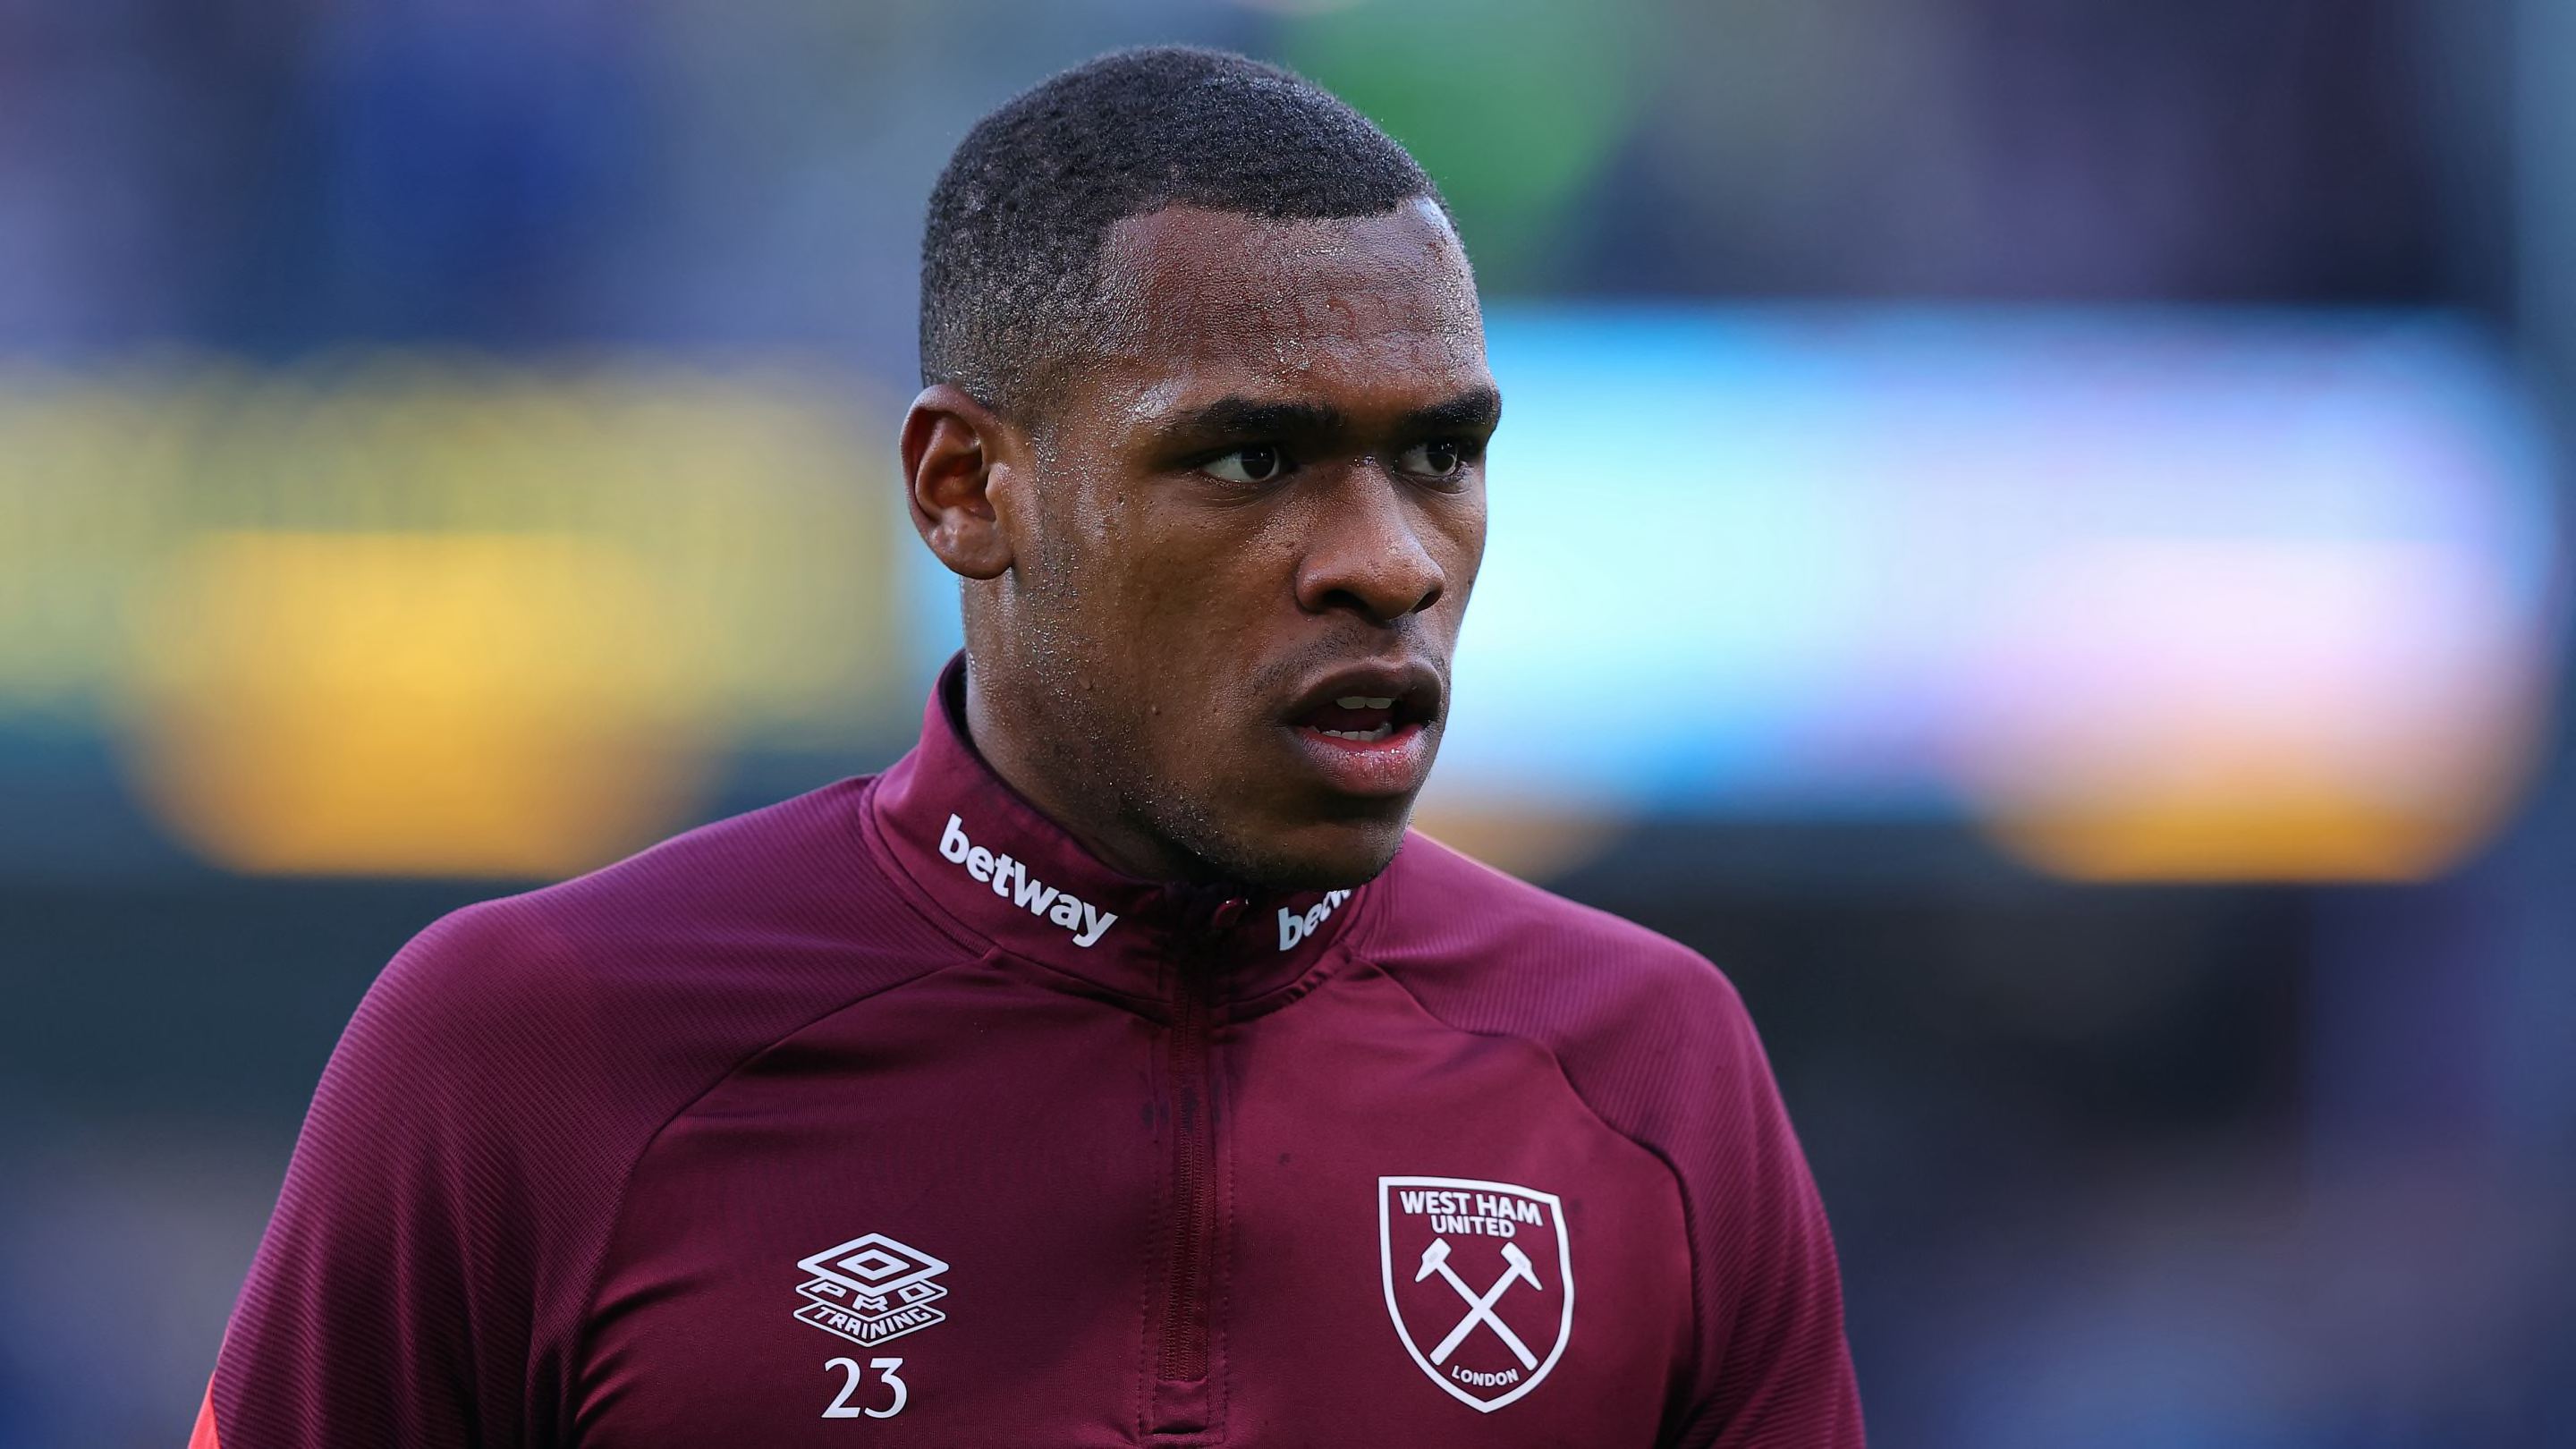 Fulham pushing to sign Issa Diop from West Ham